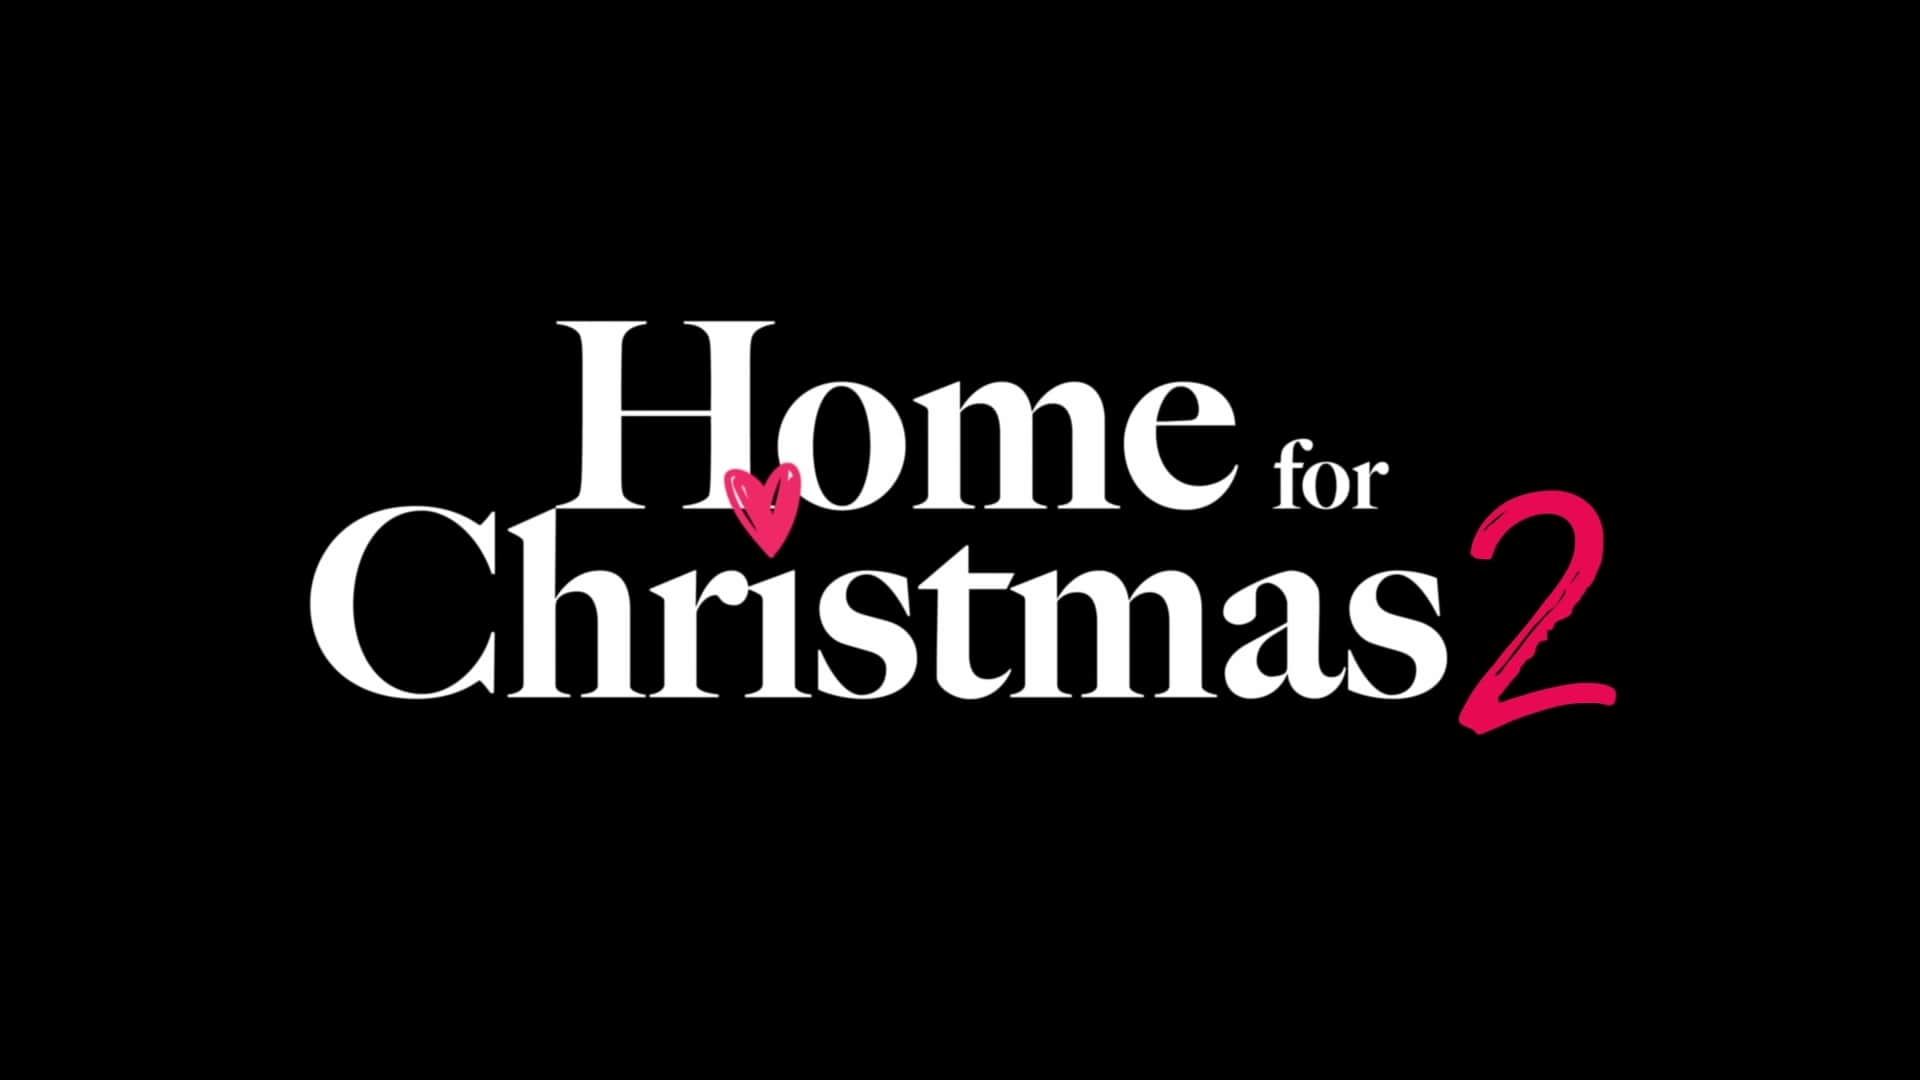 Netflix Home for Christmas Season 2 Trailer, Netflix Romantic Comedy Series, Netflix Holiday Shows, Coming to Netflix in December 2020